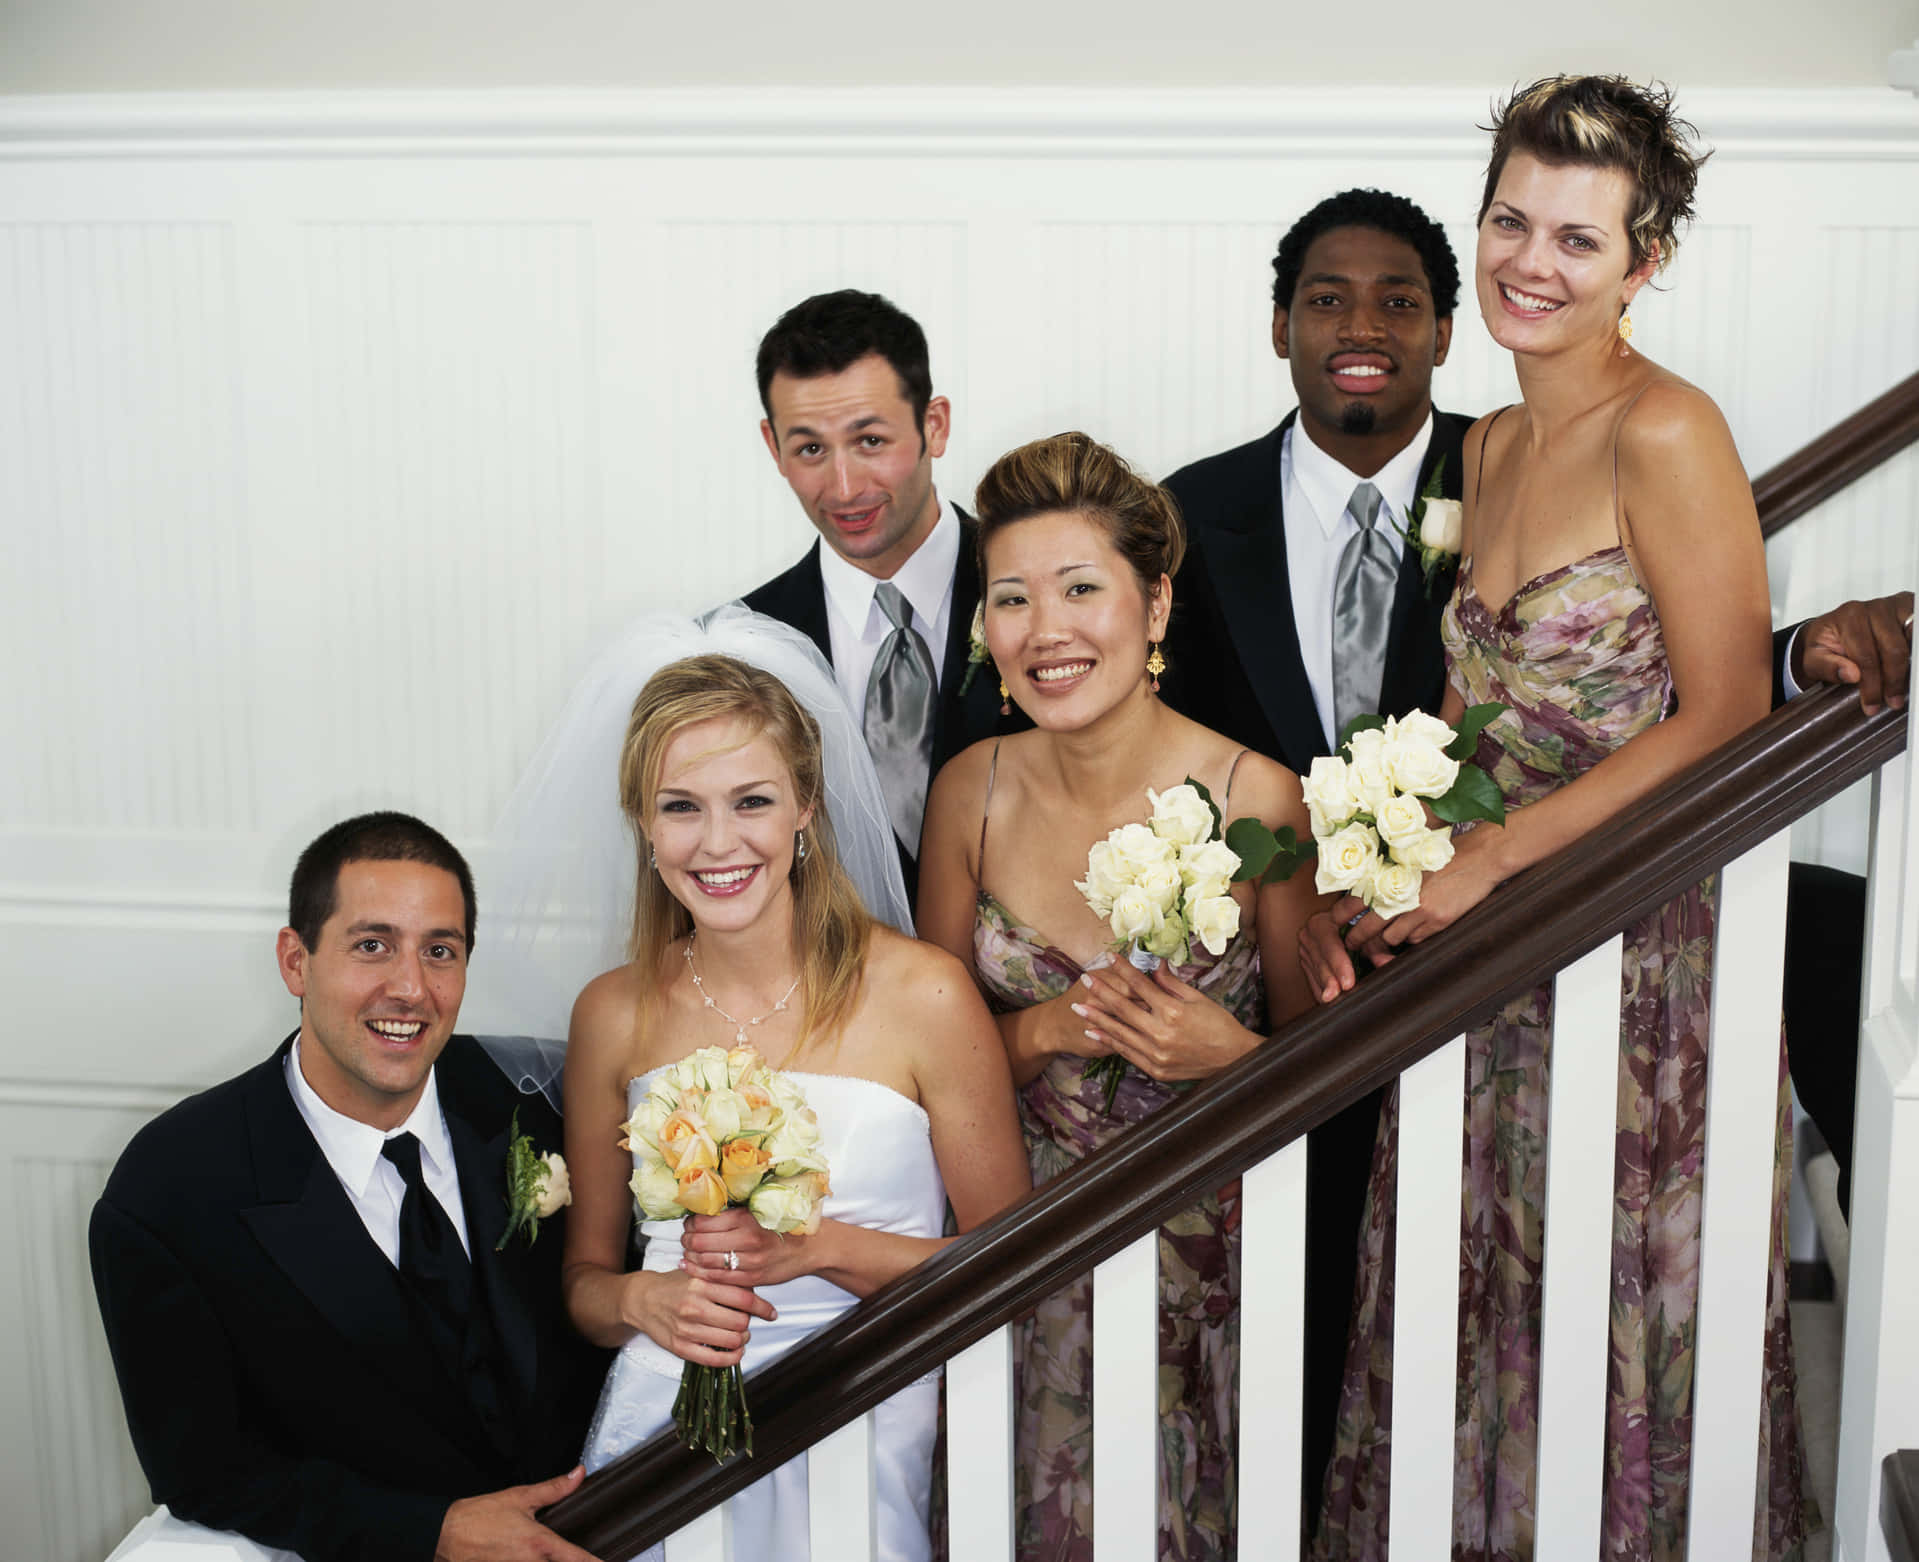 Happy Bridal Party Pictures